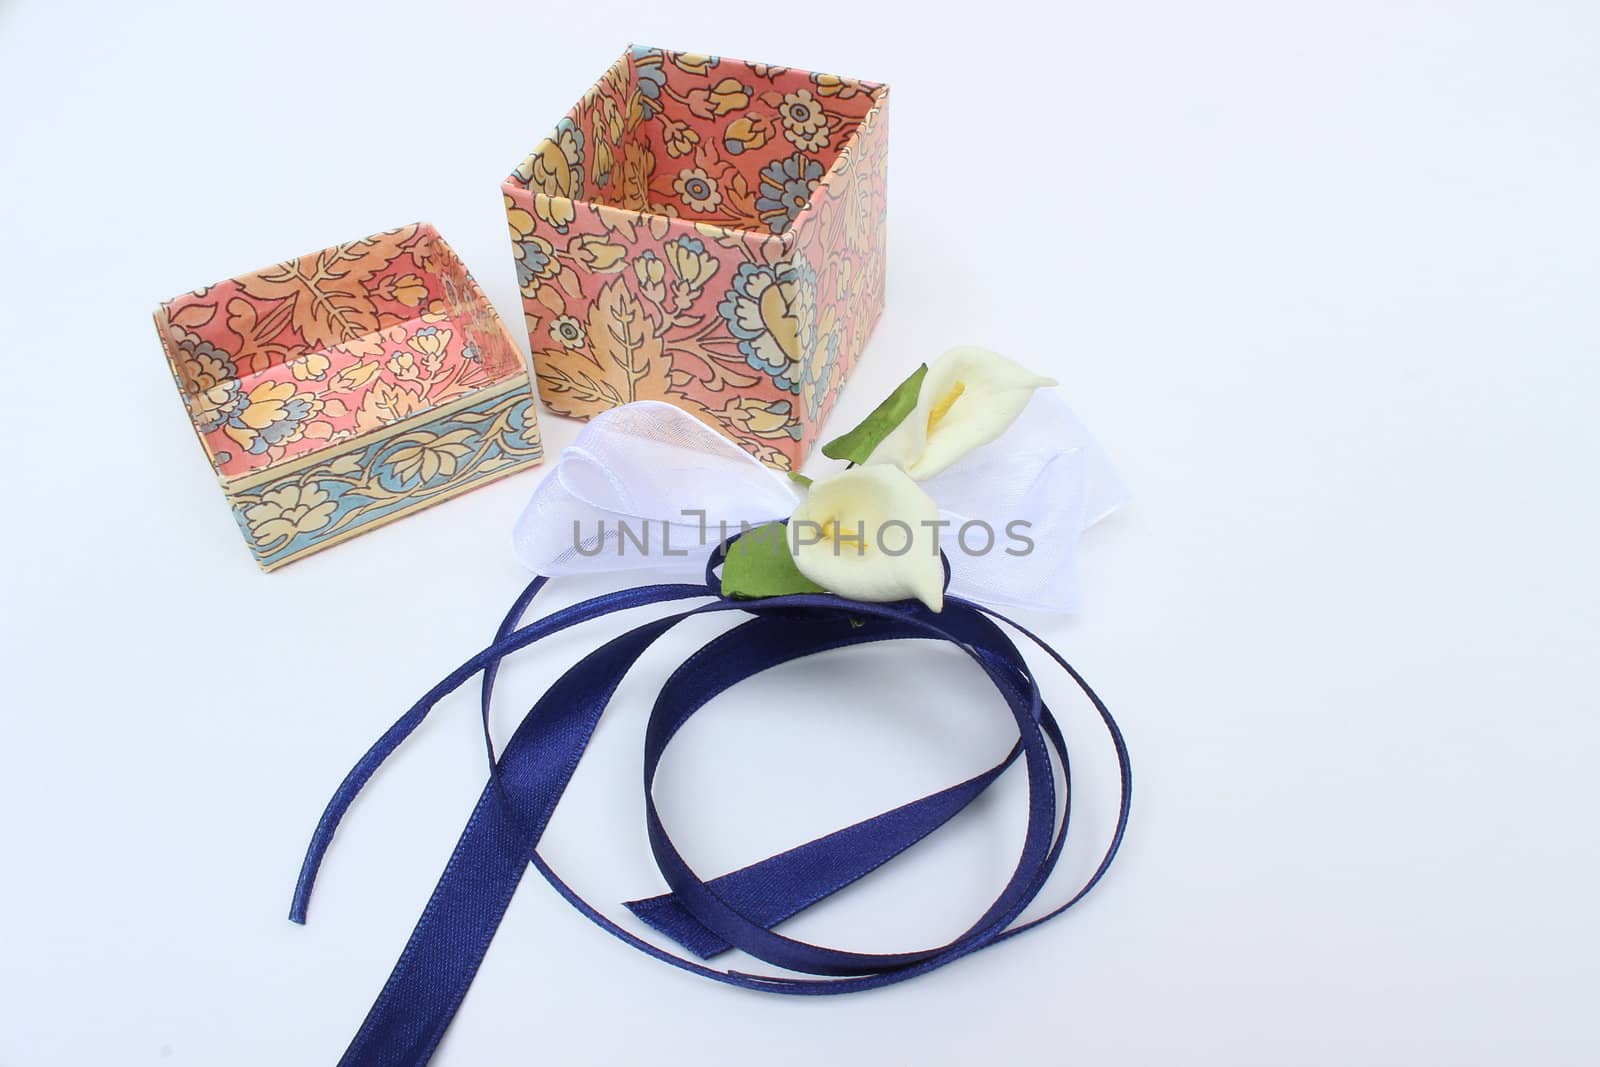 opened gift box with decorative ribbon and flowers